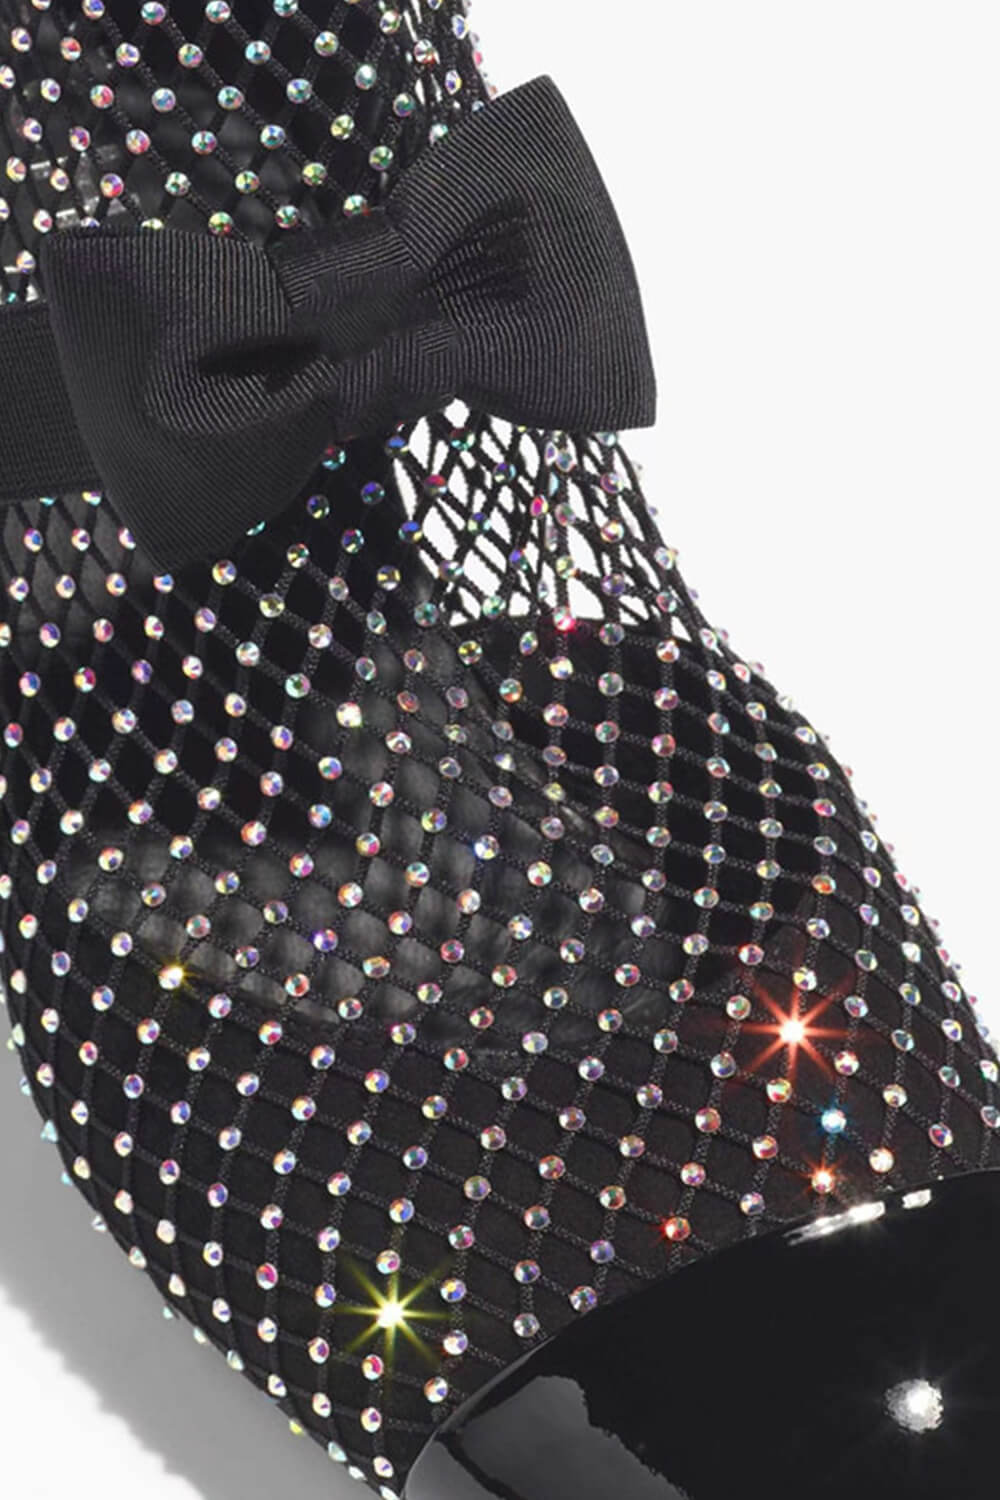 Suede Patent Diamante Fishnet Bow-Embellished Mary Jane Knee High Boots - Black & Silver